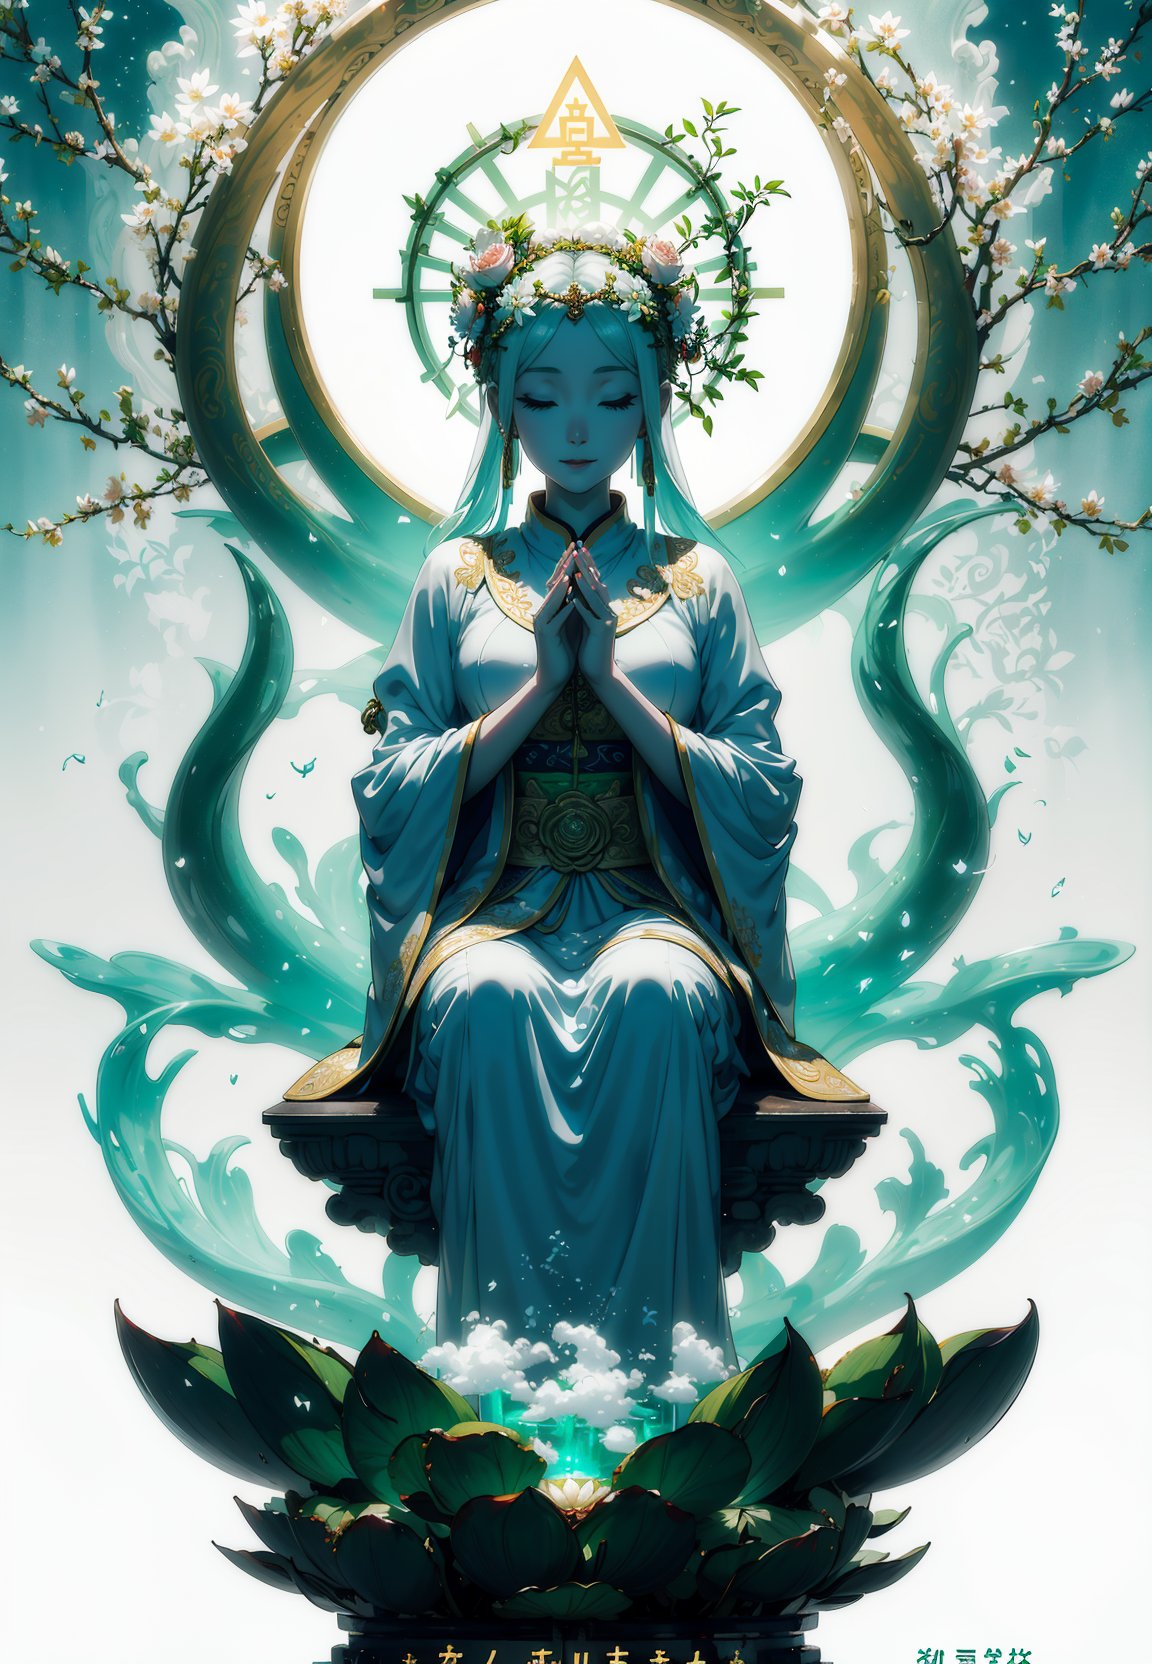 dreamy, serene, white and green:1.2),(full body, sitting, Guanyin with jade bottle:1.1),(praying hands),(blessing),(smiling),(compassionate),(lotus throne, floating, below Guanyin:1.2),(lotus flowers, branches),(dry ice, fog, below:1.1),(from front),(medium shot),As she sits on a floating lotus throne, Guanyin holds a jade bottle and makes a praying gesture. She smiles and blesses the world with her compassion. Behind her, lotus flowers and branches surround her, creating a natural and peaceful backdrop. Below her, dry ice forms a fog that adds to the dreamy atmosphere. The main colors are white and green, creating a pure and harmonious mood.(magazine:1.3), (cover-style:1.3), fashionable, woman, vibrant, outfit, posing, front, colorful, dynamic, background, elements, confident, expression, holding, statement, accessory, majestic, coiled, around, touch, scene, text, cover, bold, attention-grabbing, title, stylish, font, catchy, headline, larger, striking, modern, trendy, focus, fashion,, baisixuegao,white pantyhose,, masterpiece, best quality, lens flare, depth of field, motion blur, (backlighting, Backlight:1.1),  grating,raster,(Light through hair:1.2),from side,